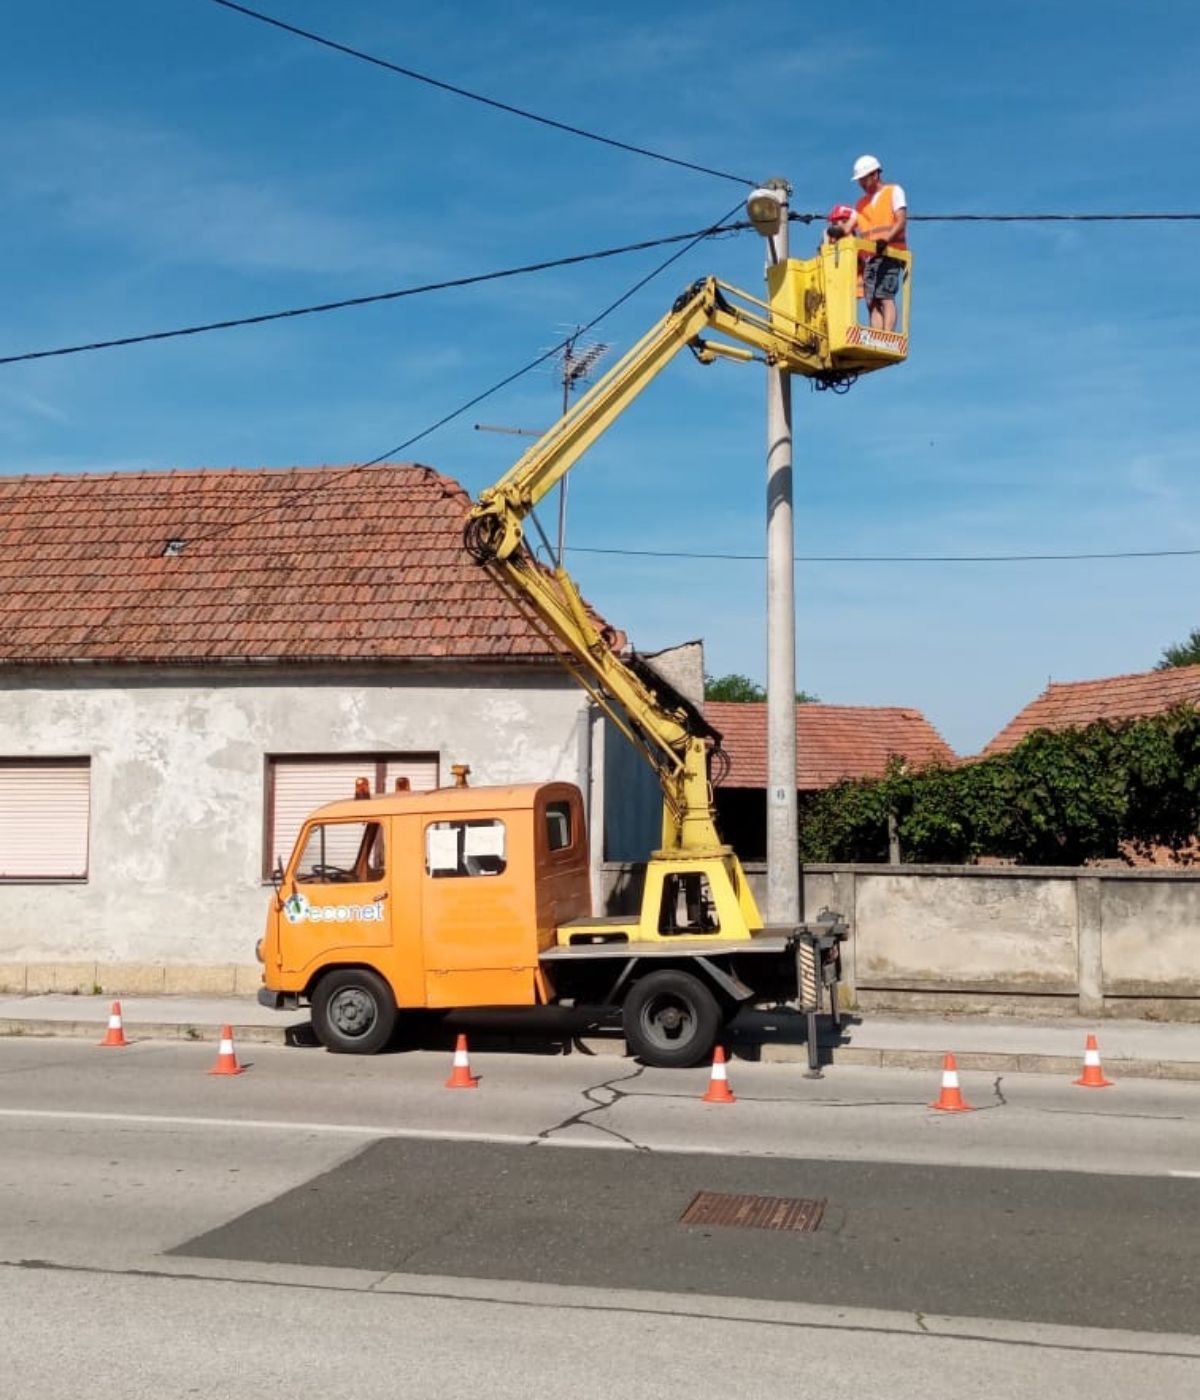 Croatian company use Twoosk fiber cables to expand business